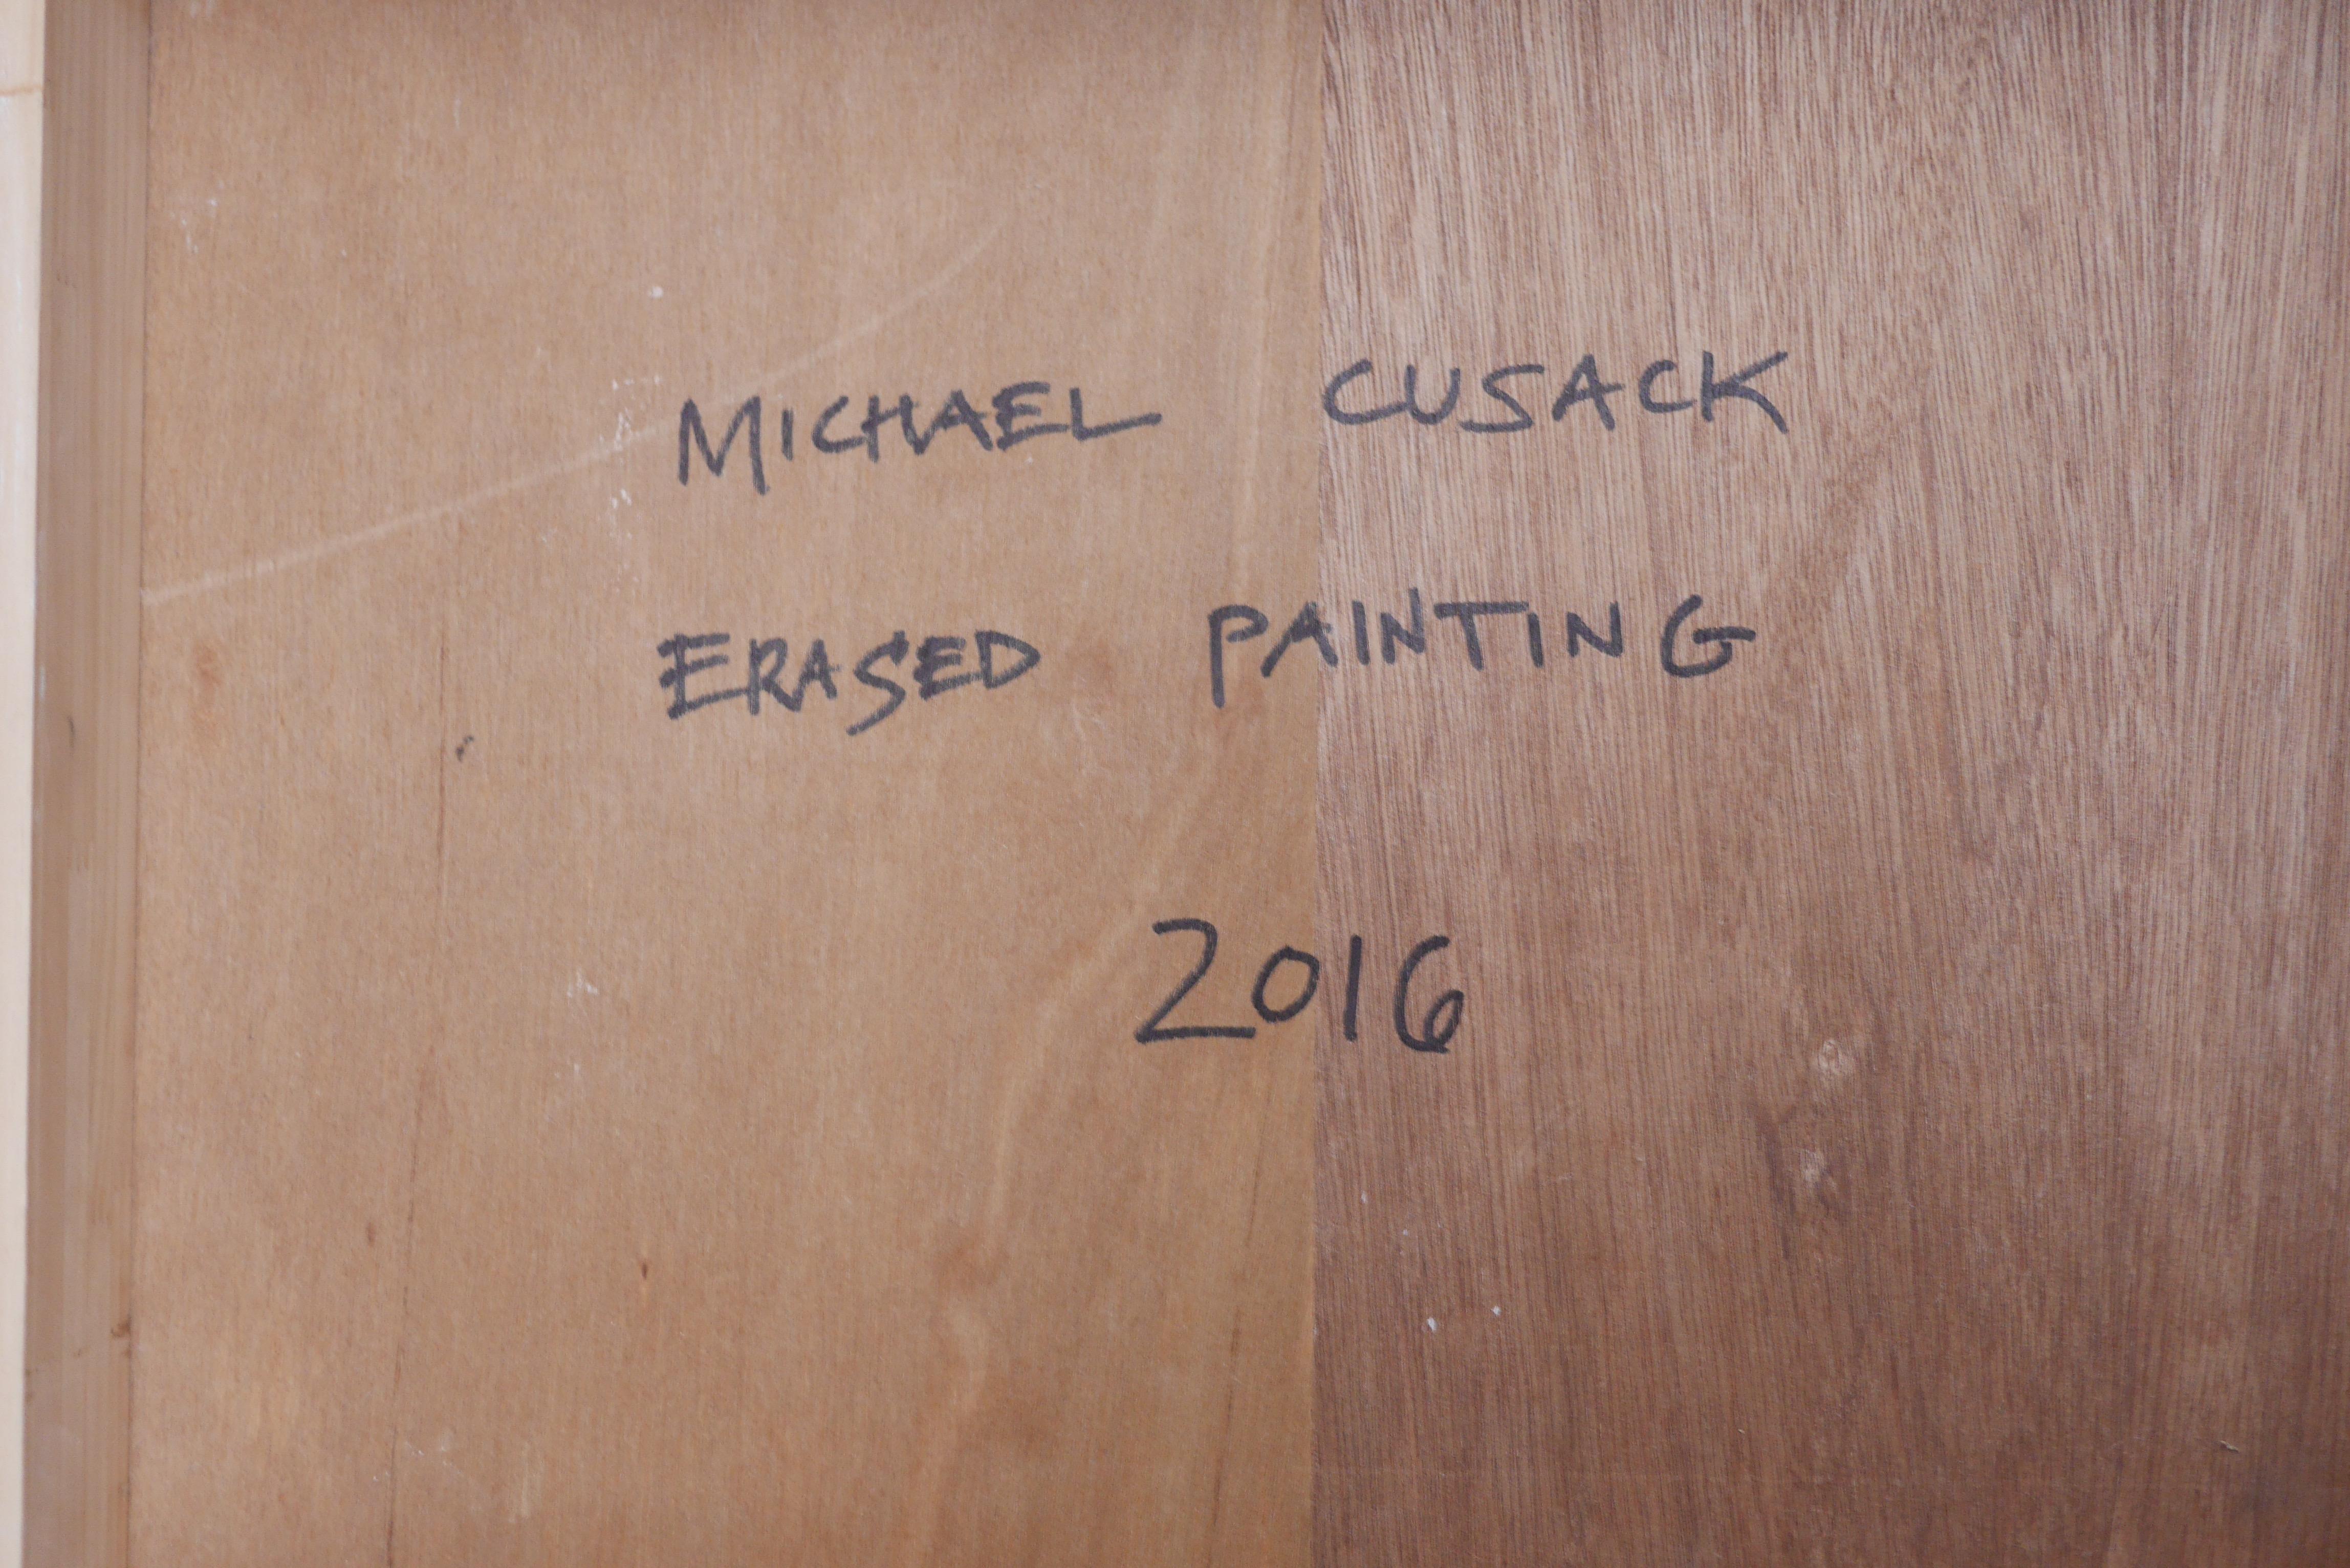 Erased Painting (Abstract painting)

Mixed media on plywood - Unframed

Michael Cusack is an Irish-born, Australia-based abstract painter. His work is painterly, emotive, dramatic, and evocative of the struggle between forces of nature.

Cusack